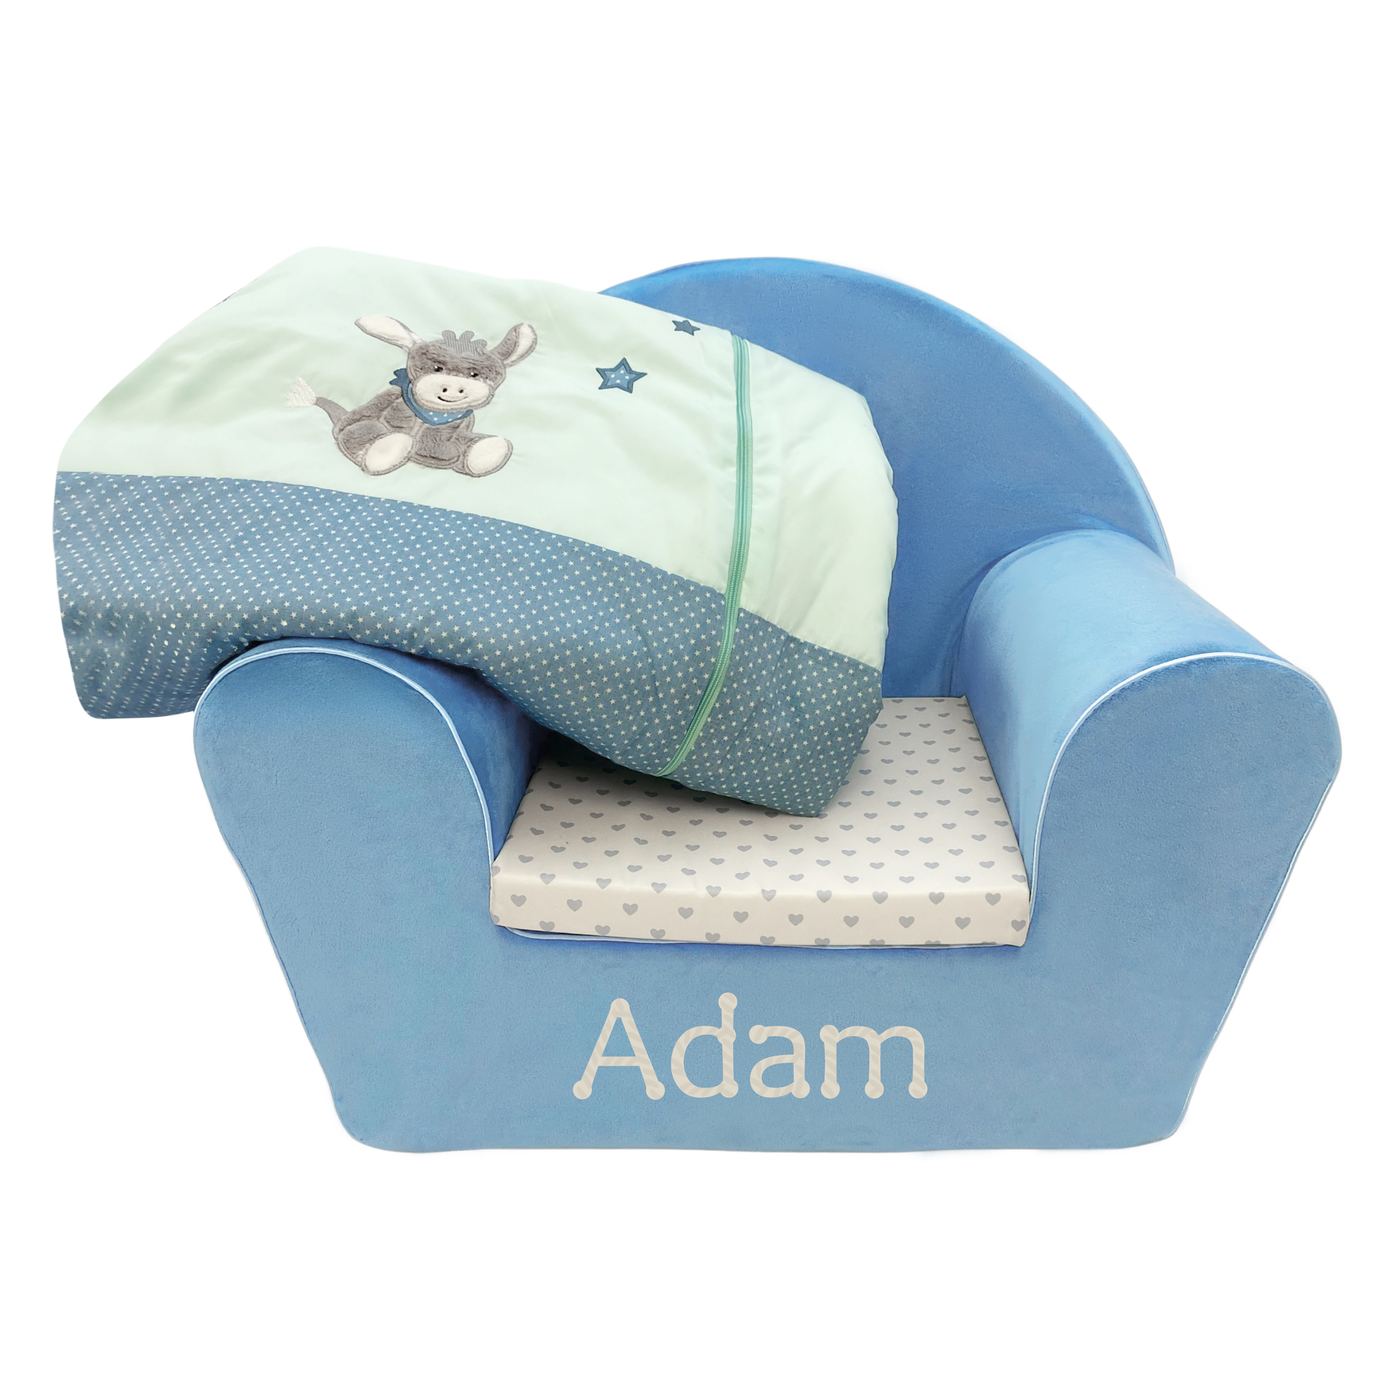 Personalised Velvet Chair for Boy with Sleeping Bag